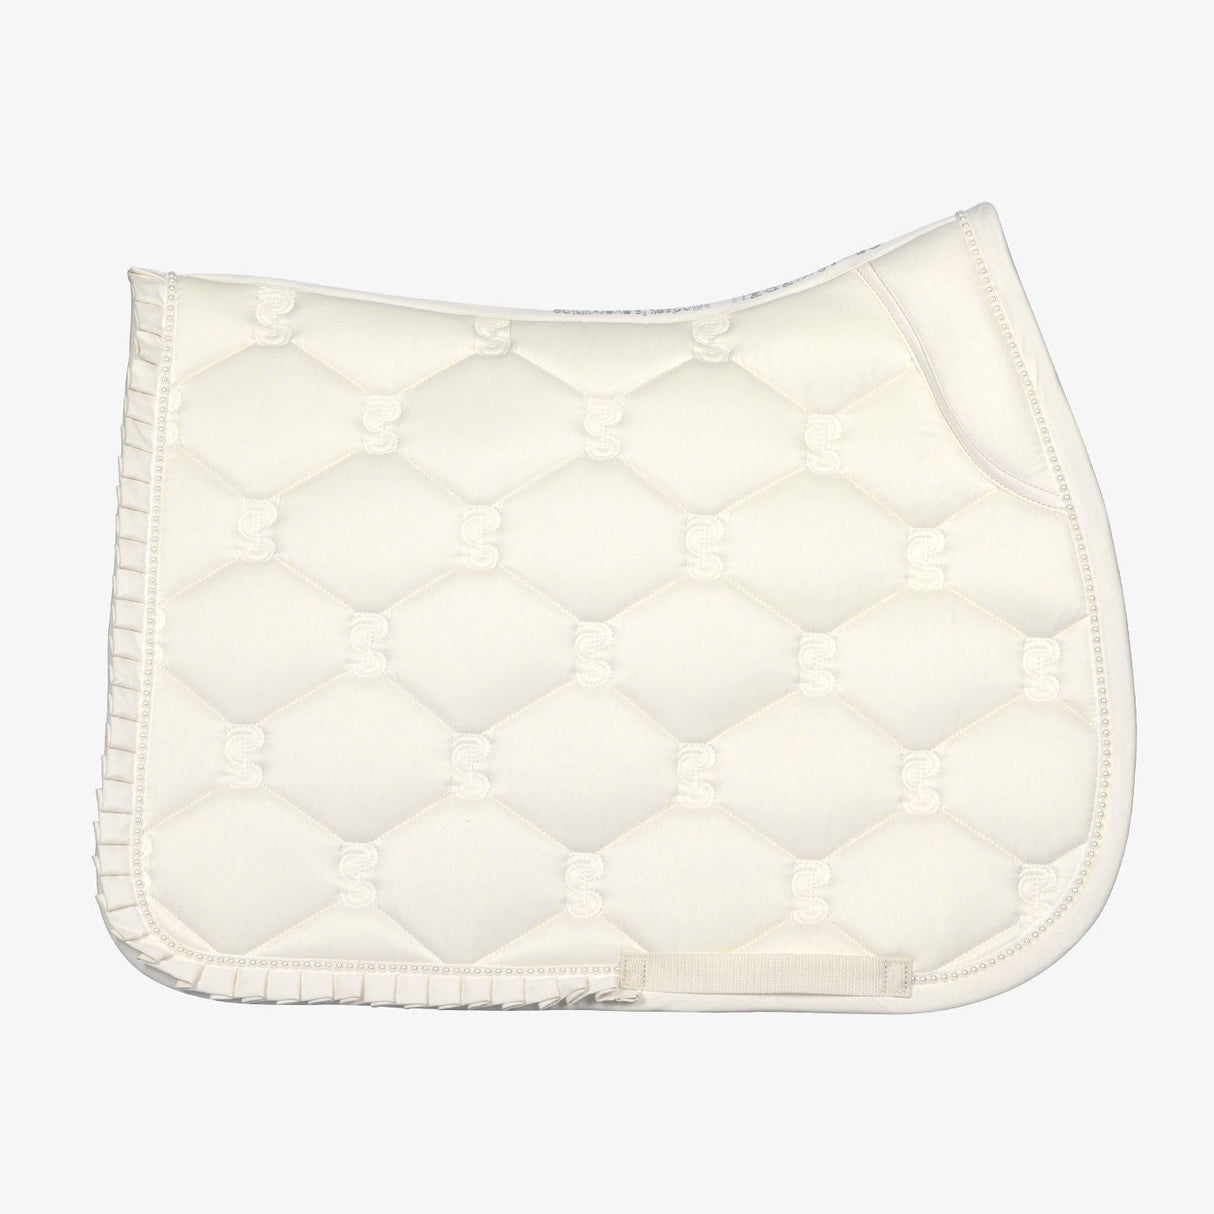 PS of Sweden Off White Ruffle Pearl Jump Saddle Pad